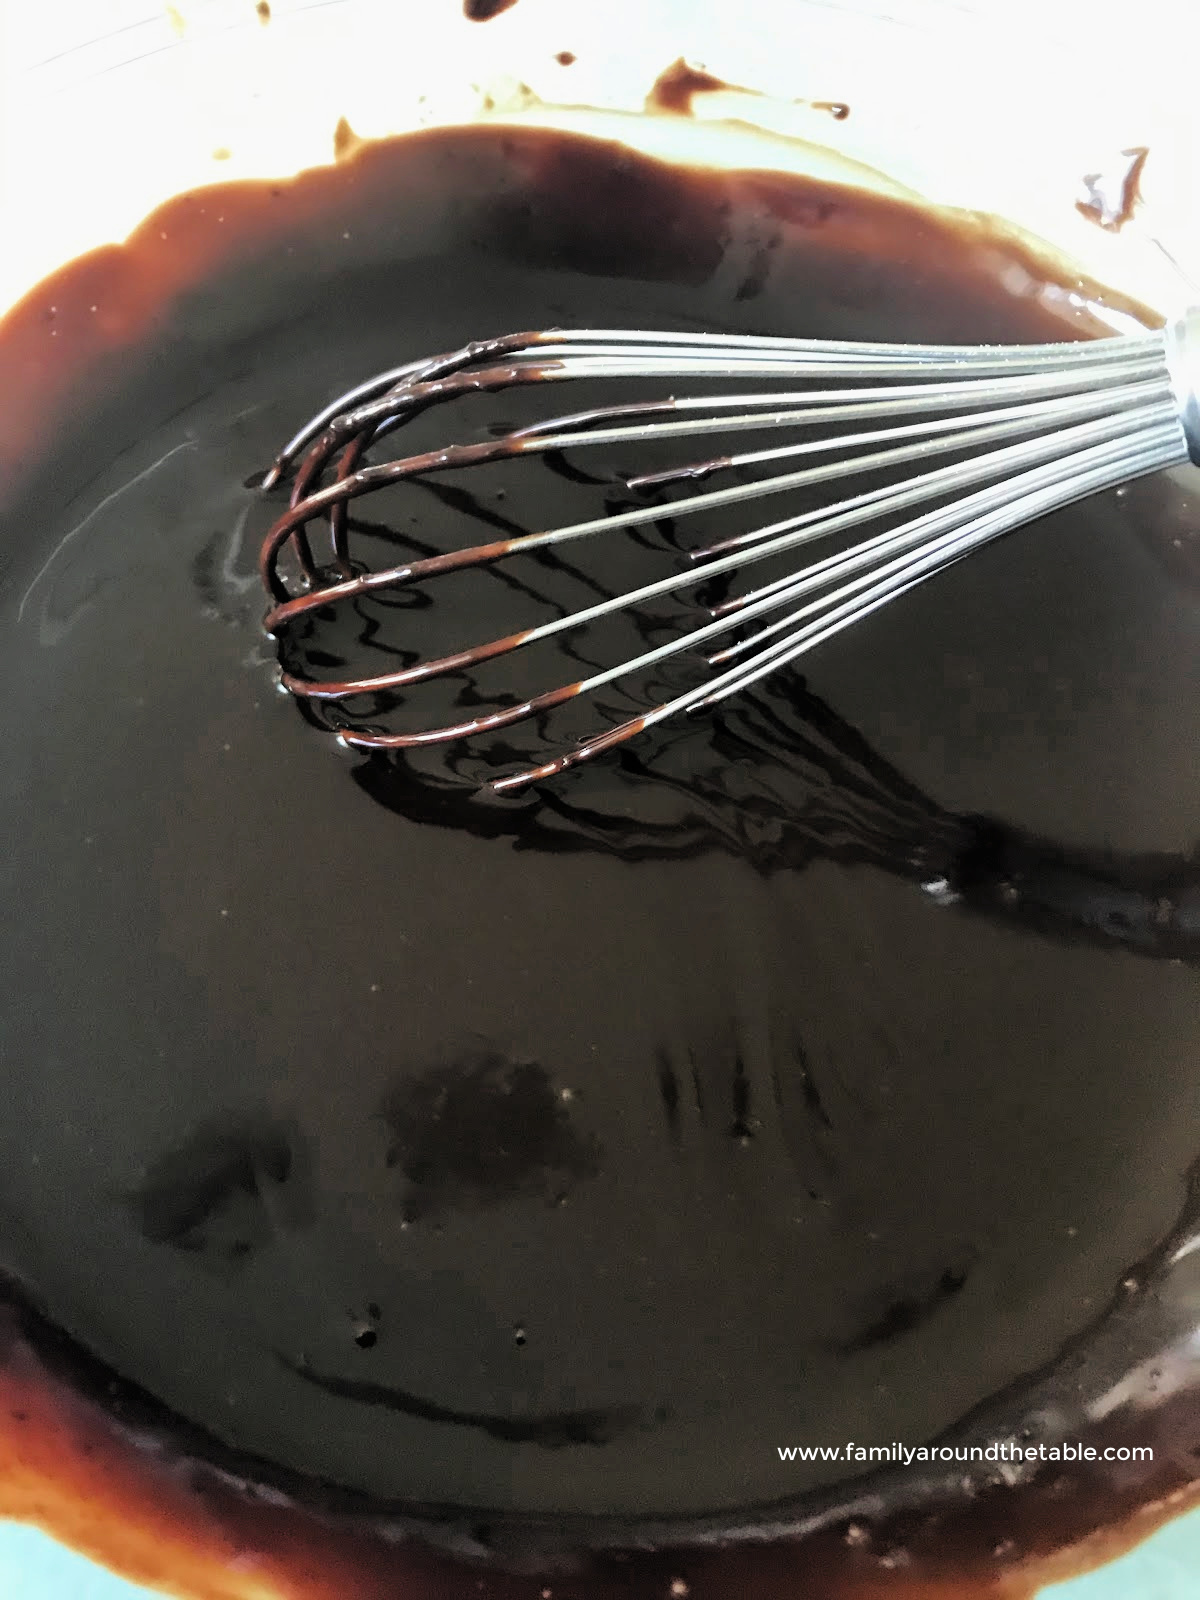 Ganache in a bowl with a whisk.